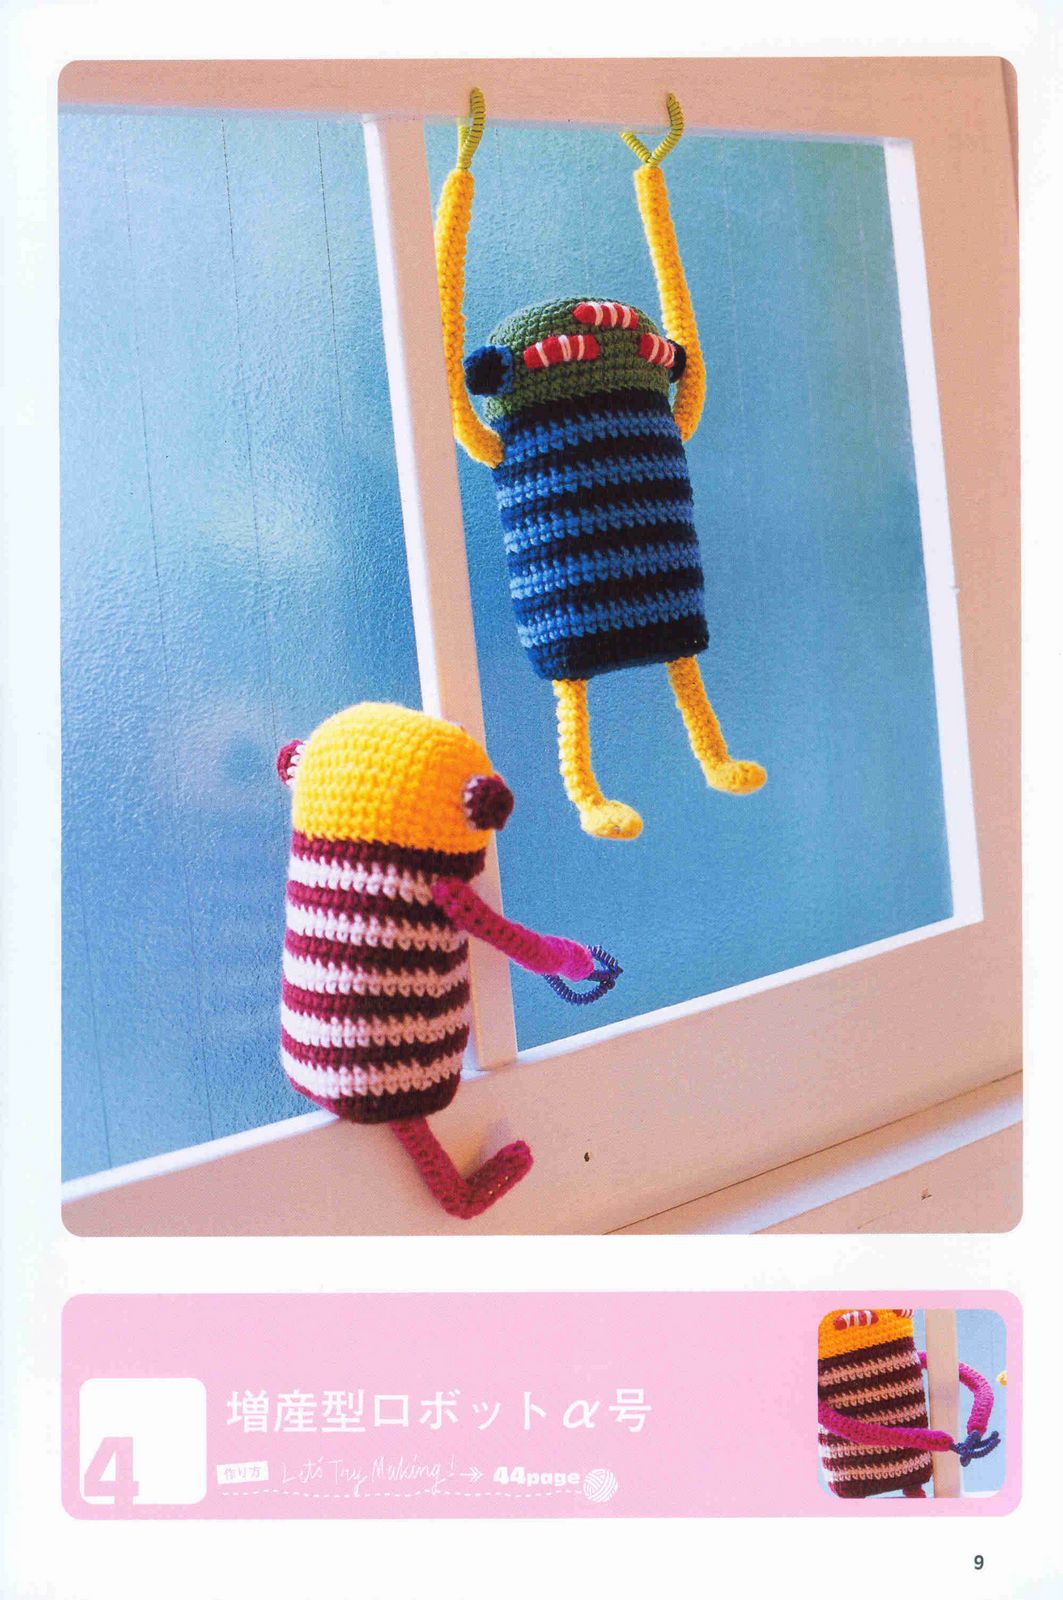 Little aliens with long arms amigurumi pattern (1)